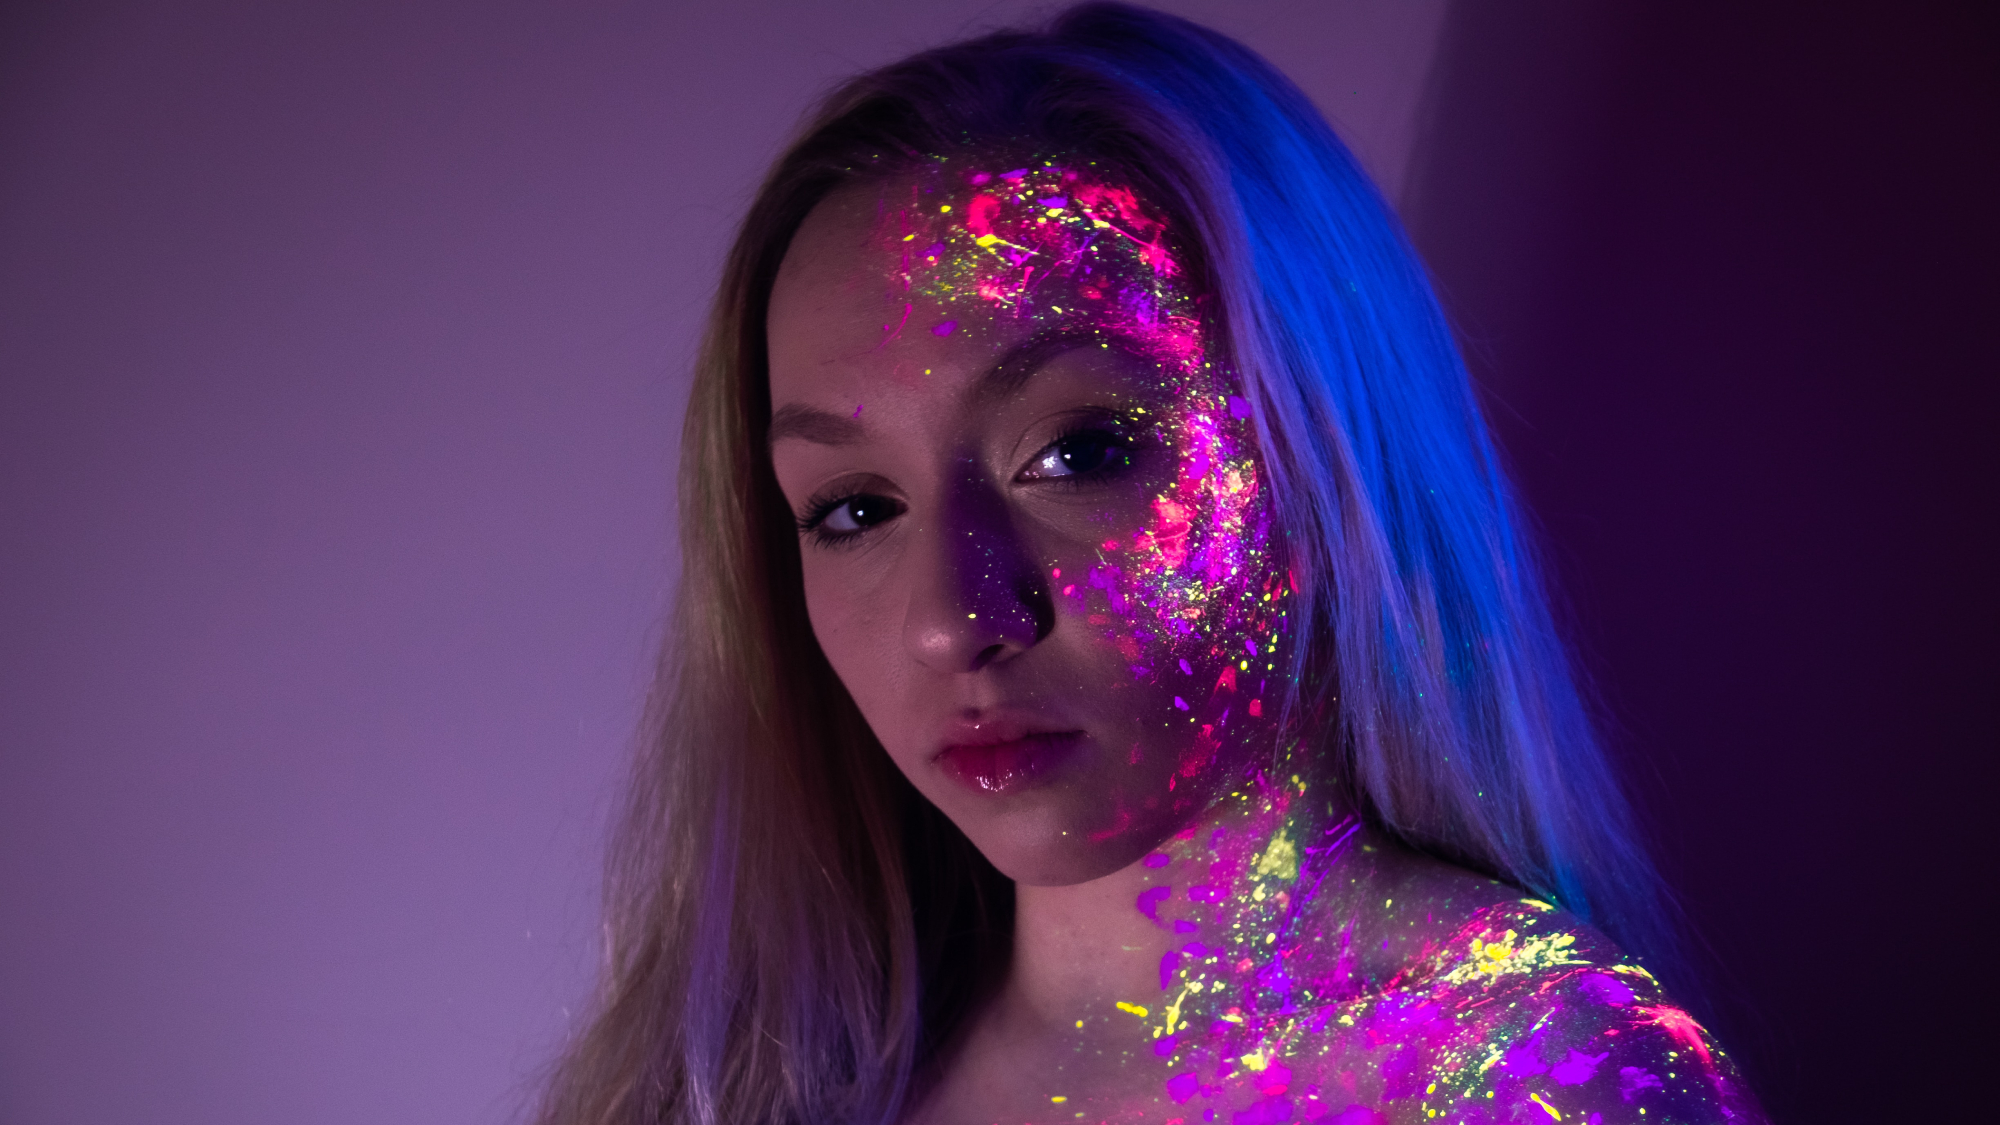 Glow-In-The-Dark Tricks You Need To Try 